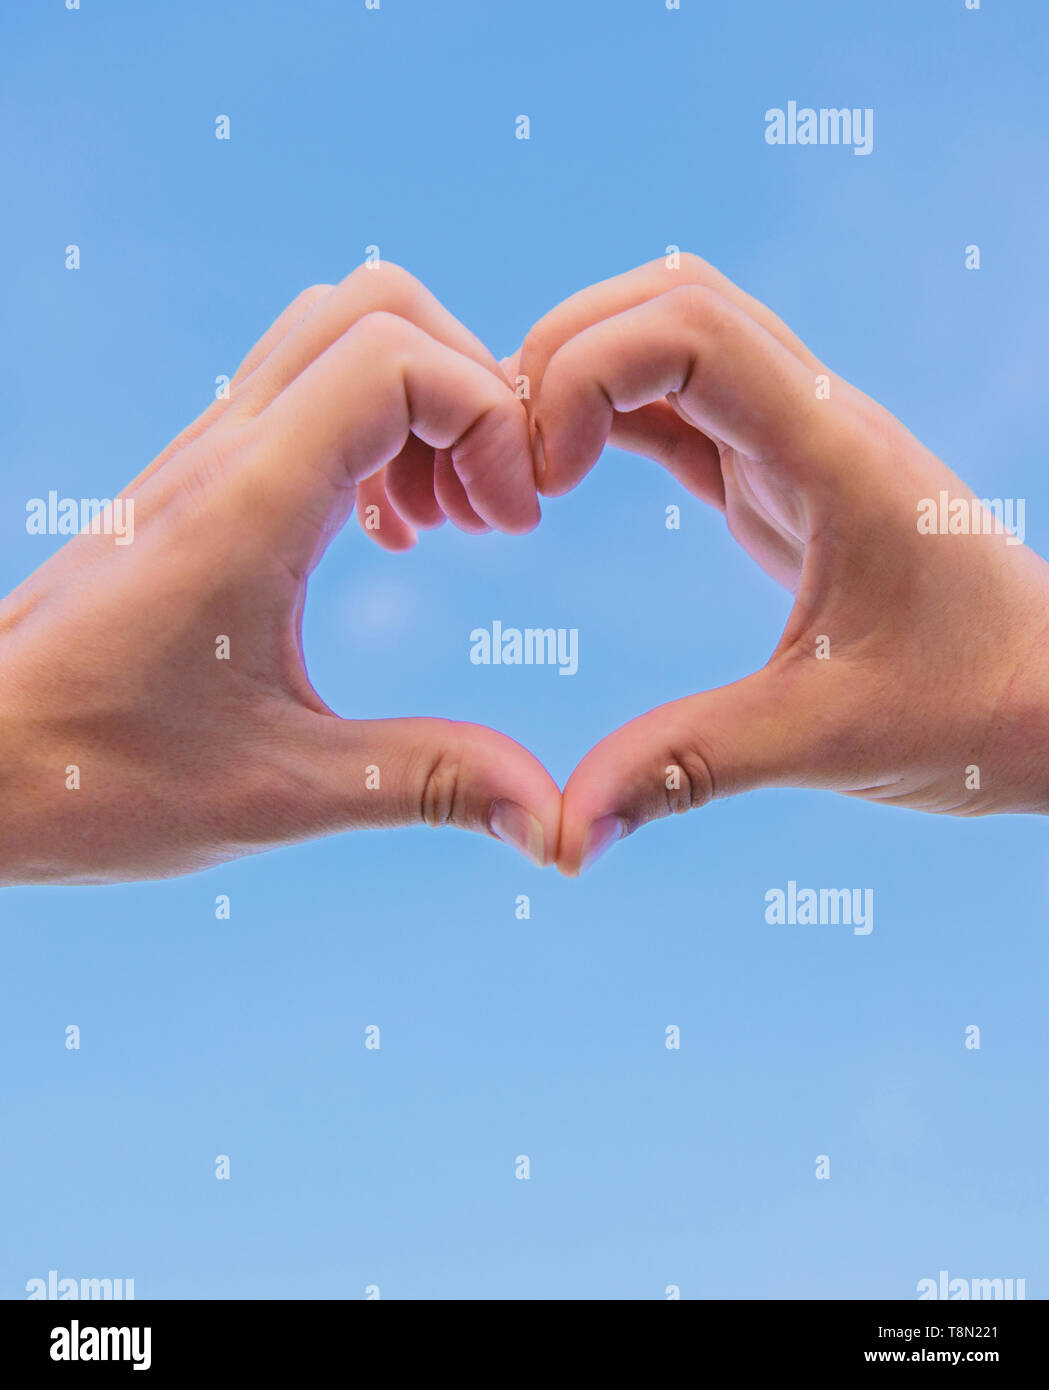 Hands put together in heart shape blue sky background. Love symbol concept.  Hand heart gesture forms shape using fingers. Male hands in heart shape  gesture symbol of love and romance Stock Photo -